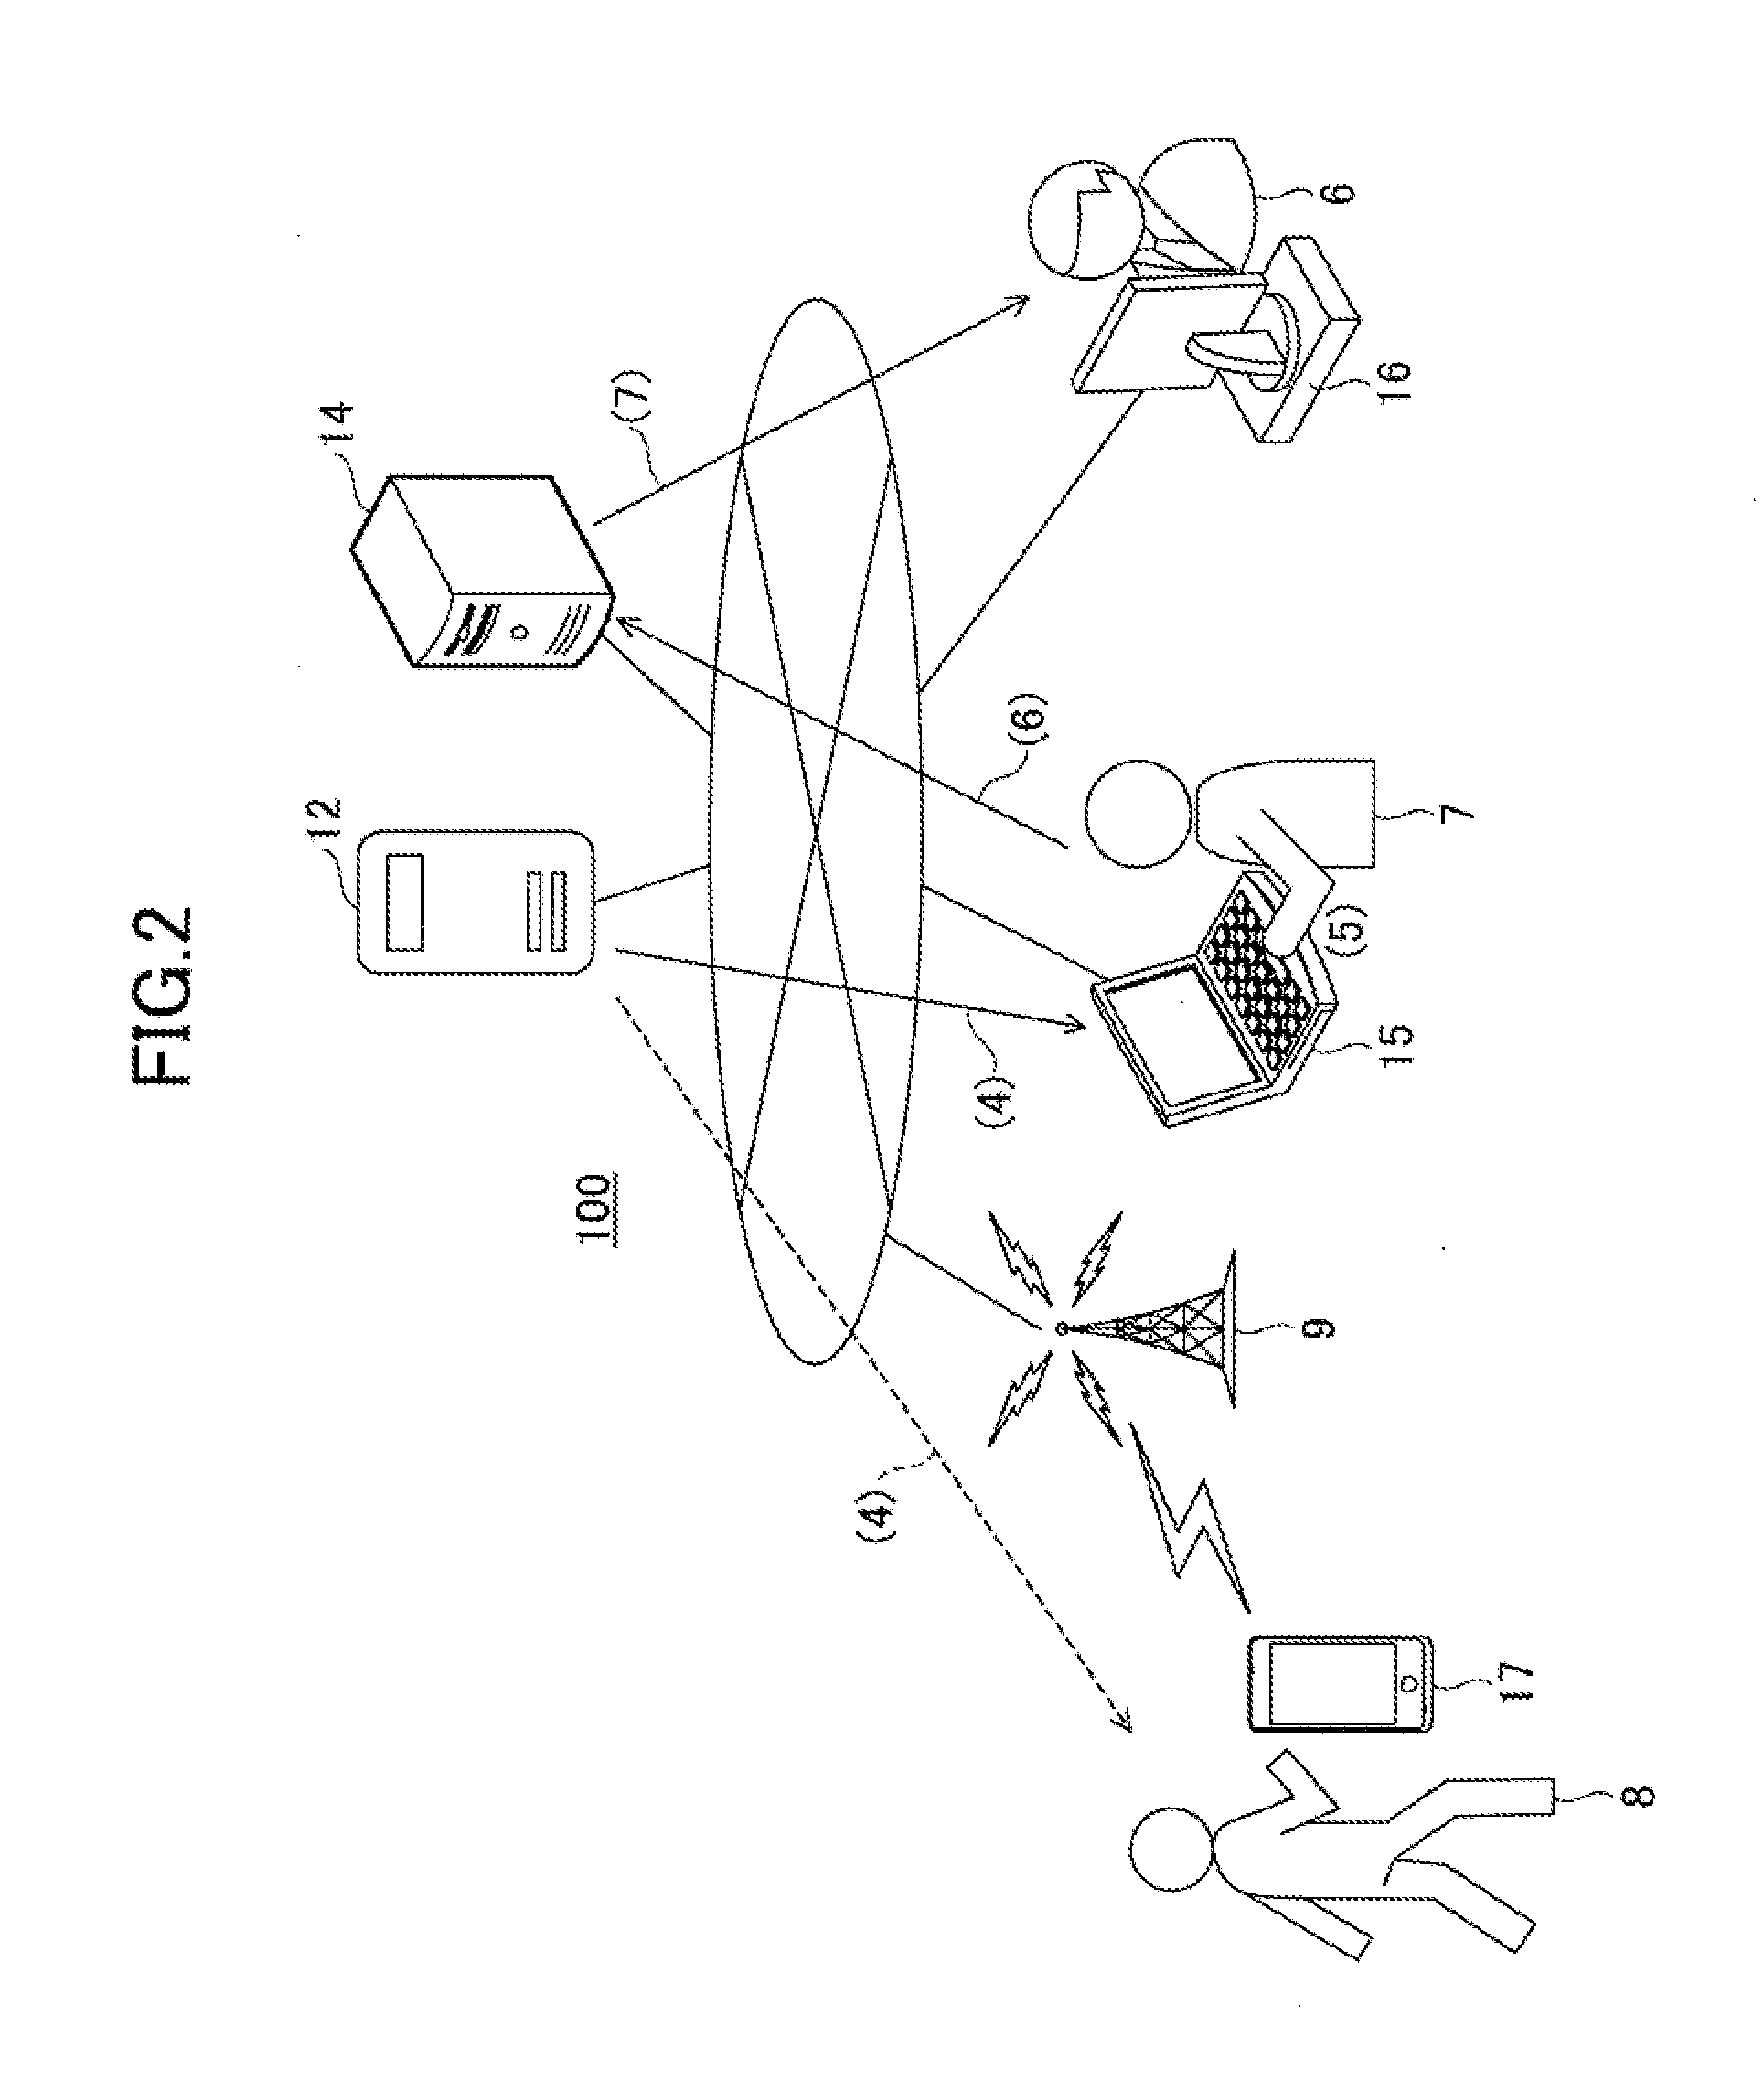 Service system, information processing apparatus, and service providing method